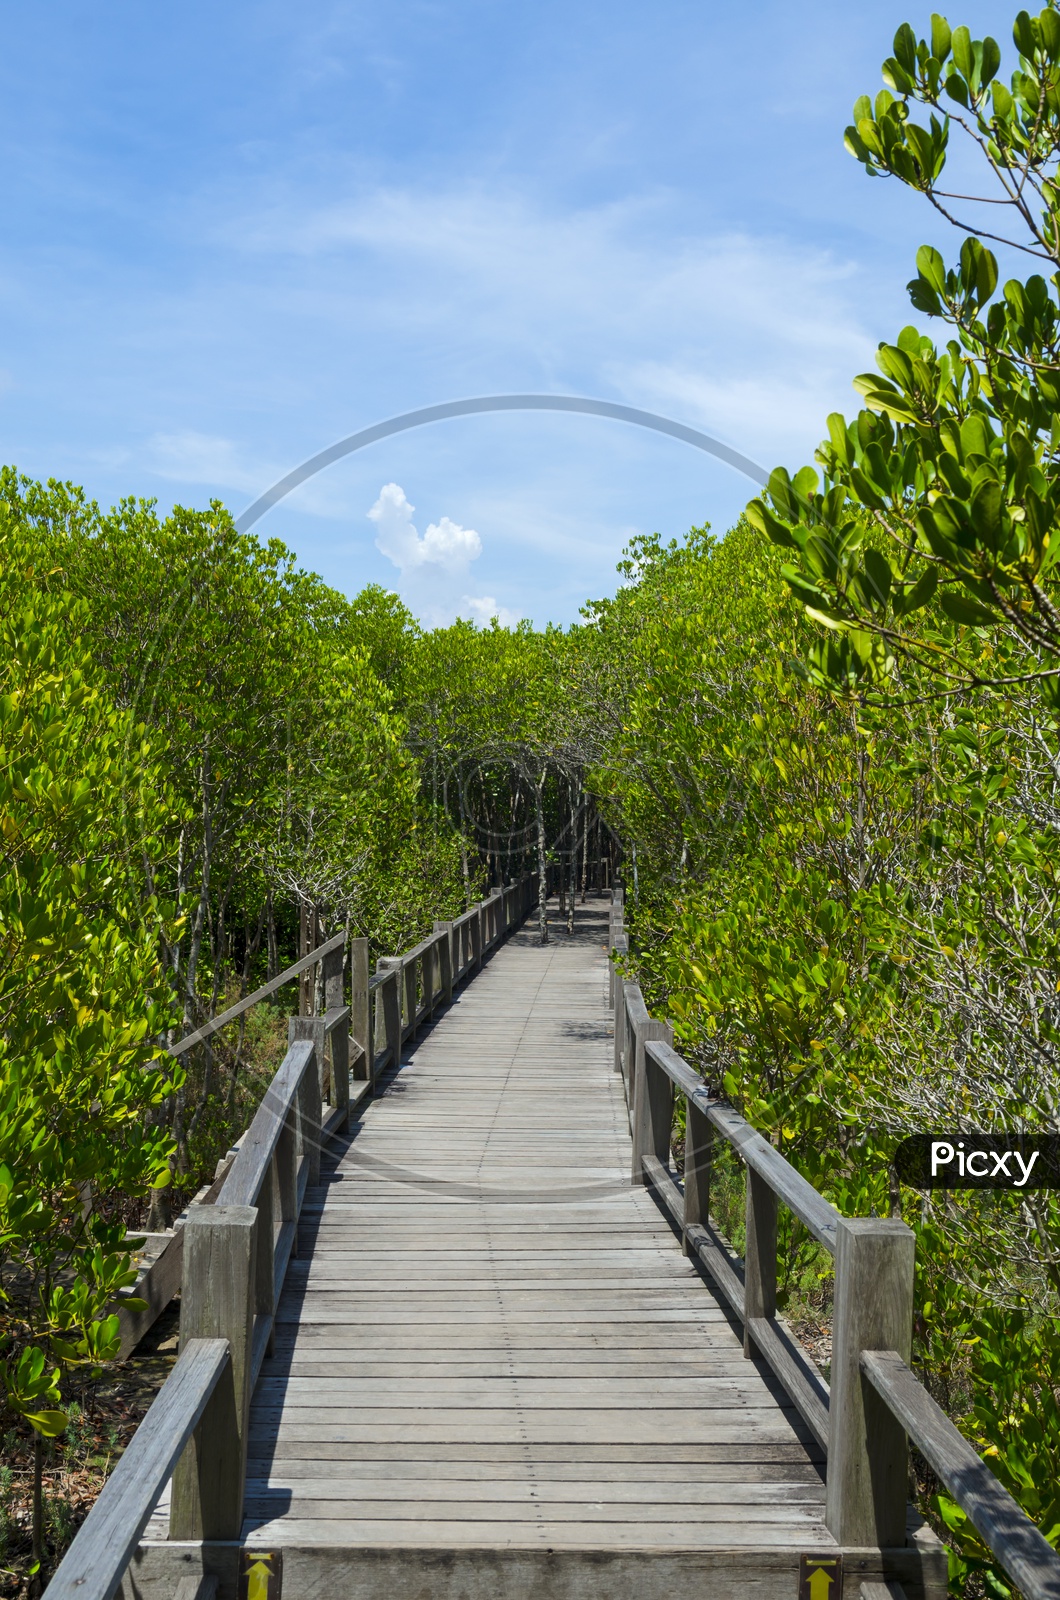 Wooden bridges With Pathways in Mangrove Forest